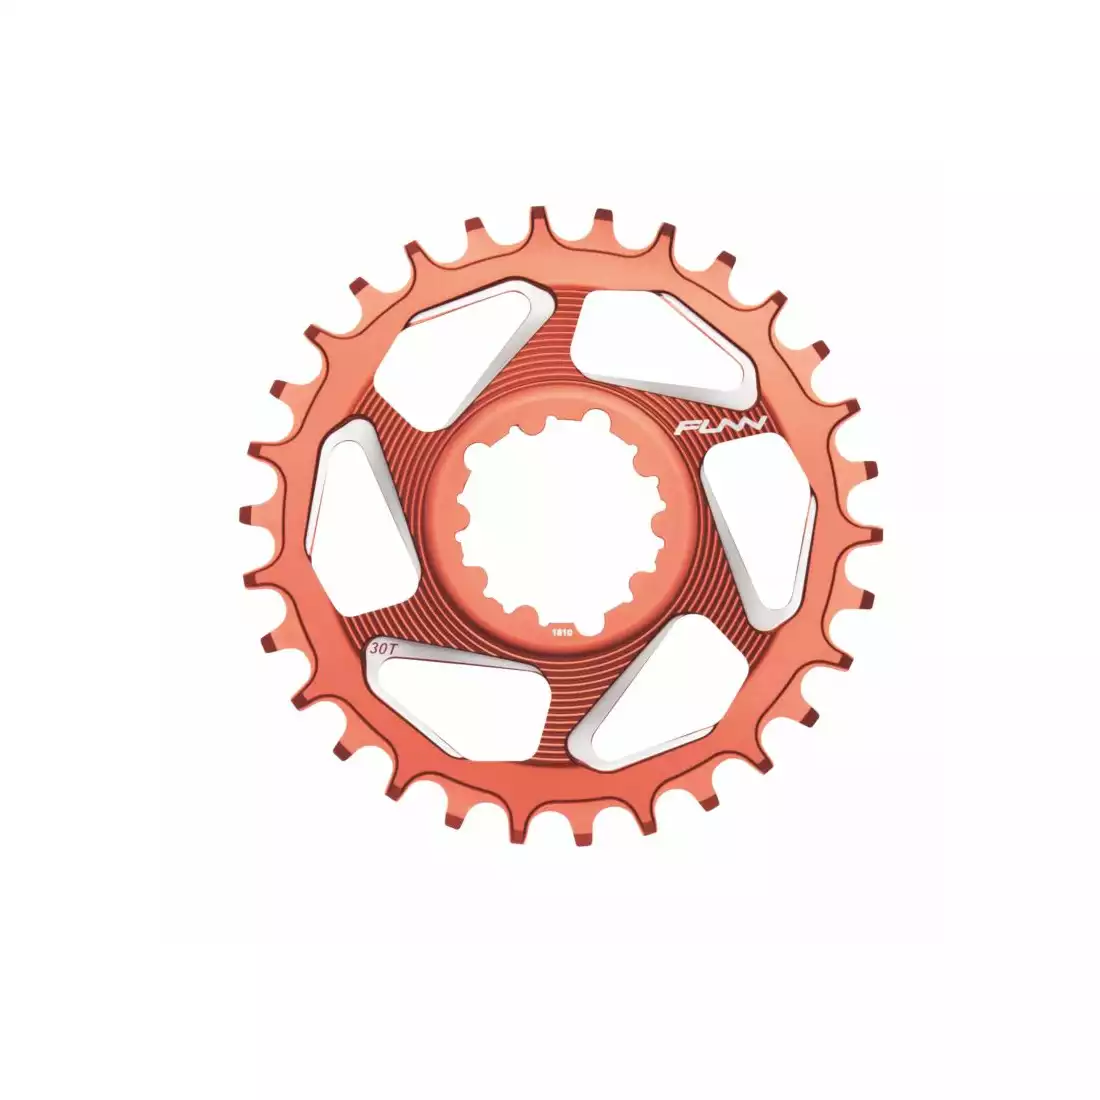 FUNN SOLO DX 30T NARROW- WIDE bicycle sprocket to crank red